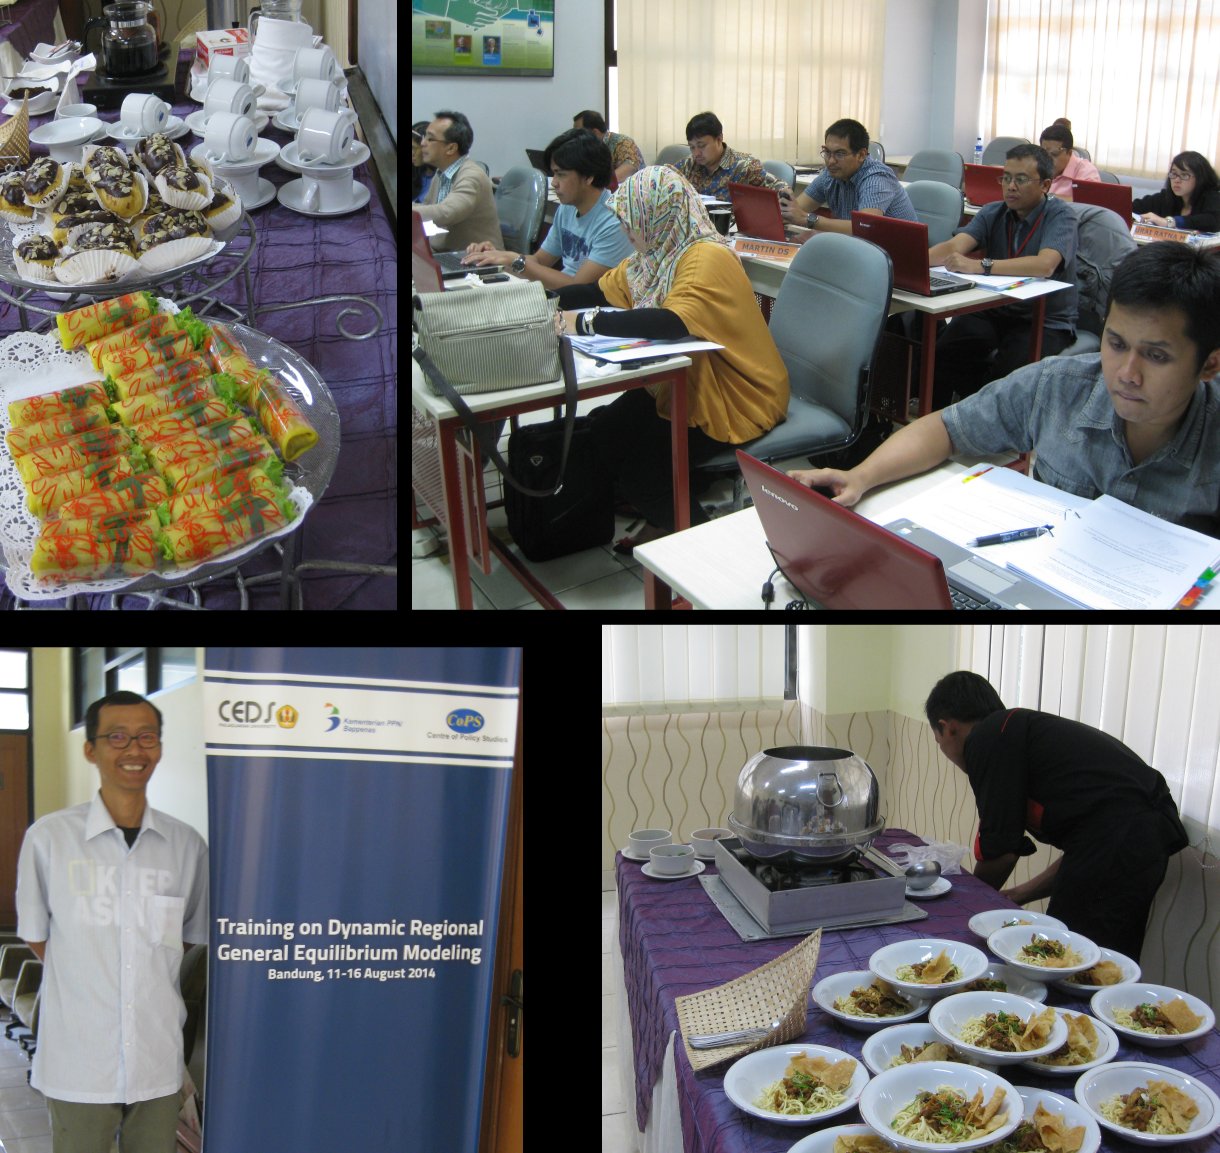 Scenes from August 2014 Dynamic Regional CGE Modelling Course in Bandung